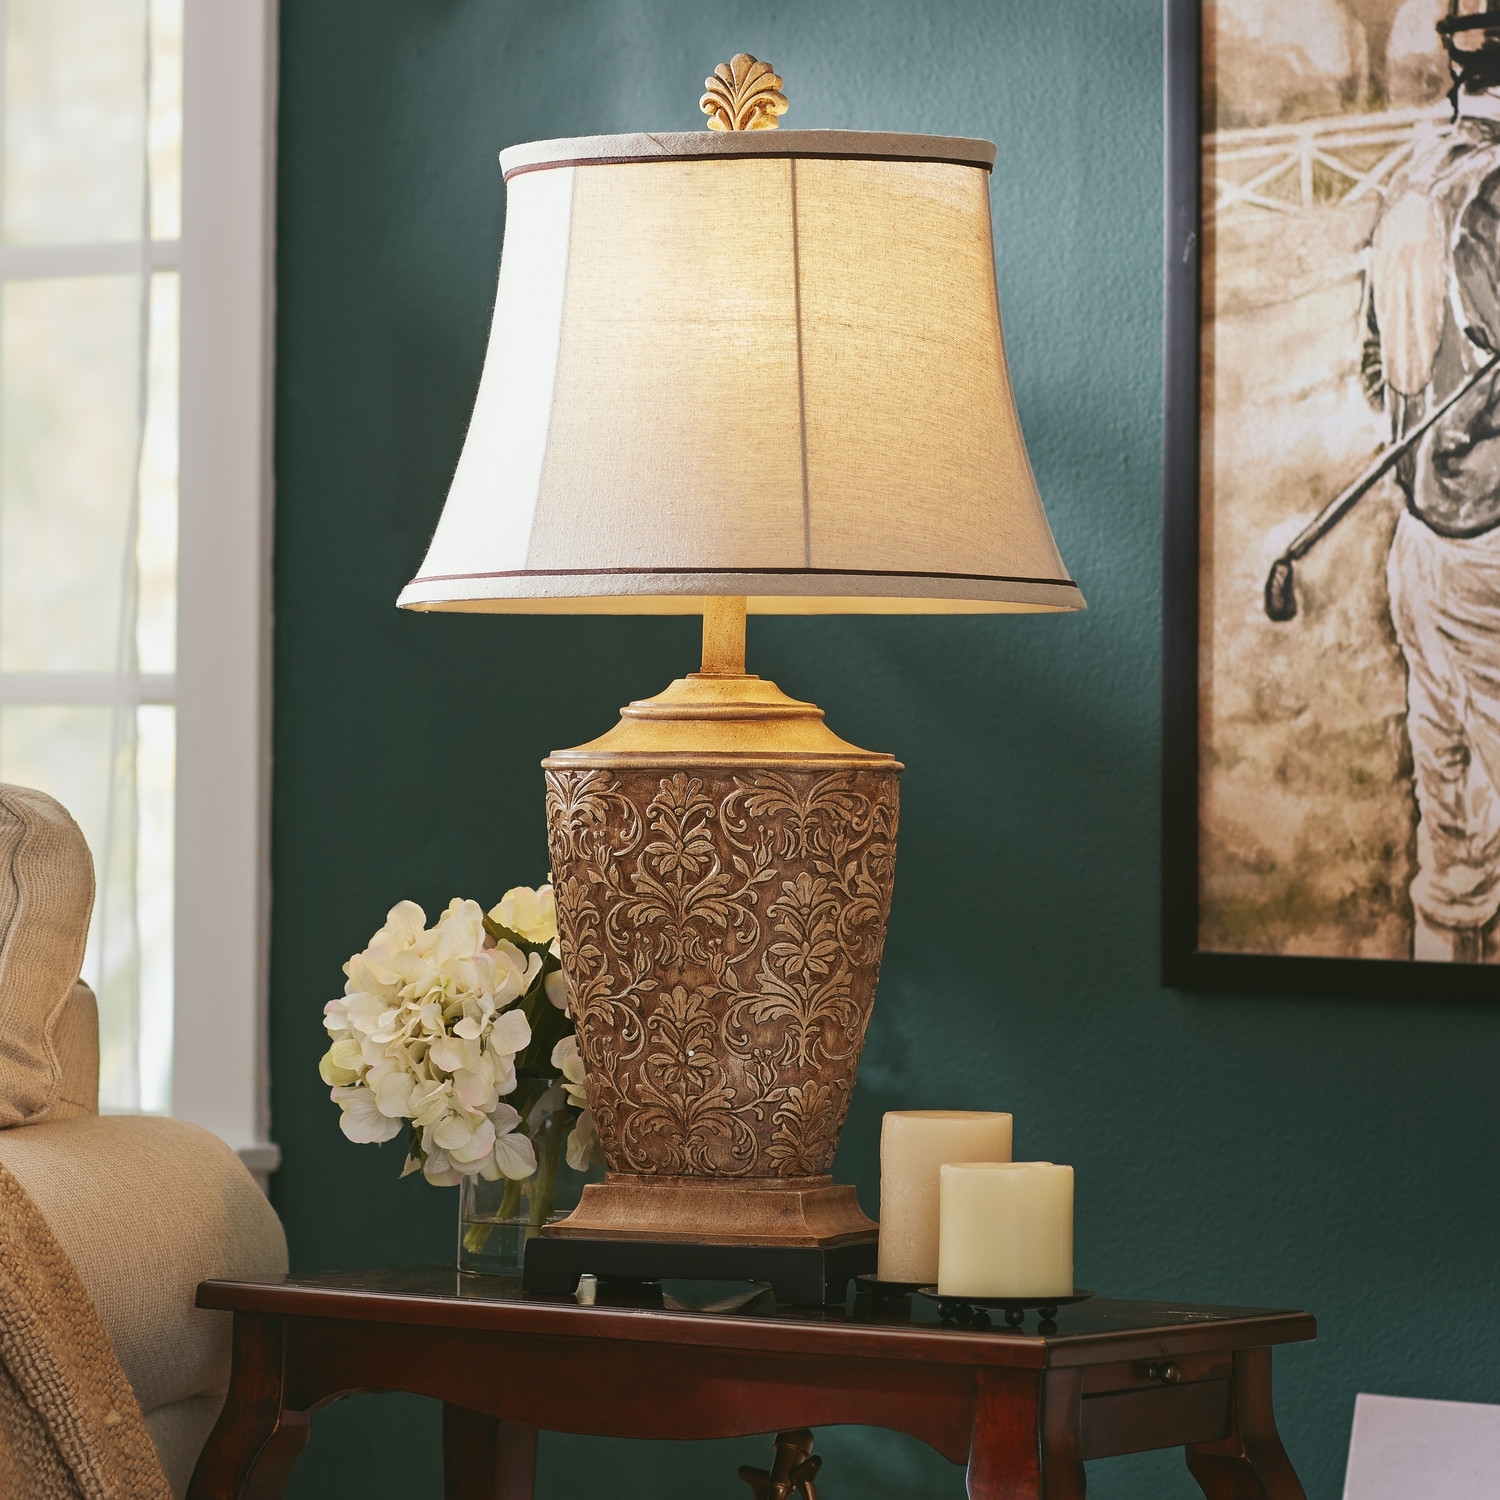 Living room table lamps - 10 methods to bring incandescent style to